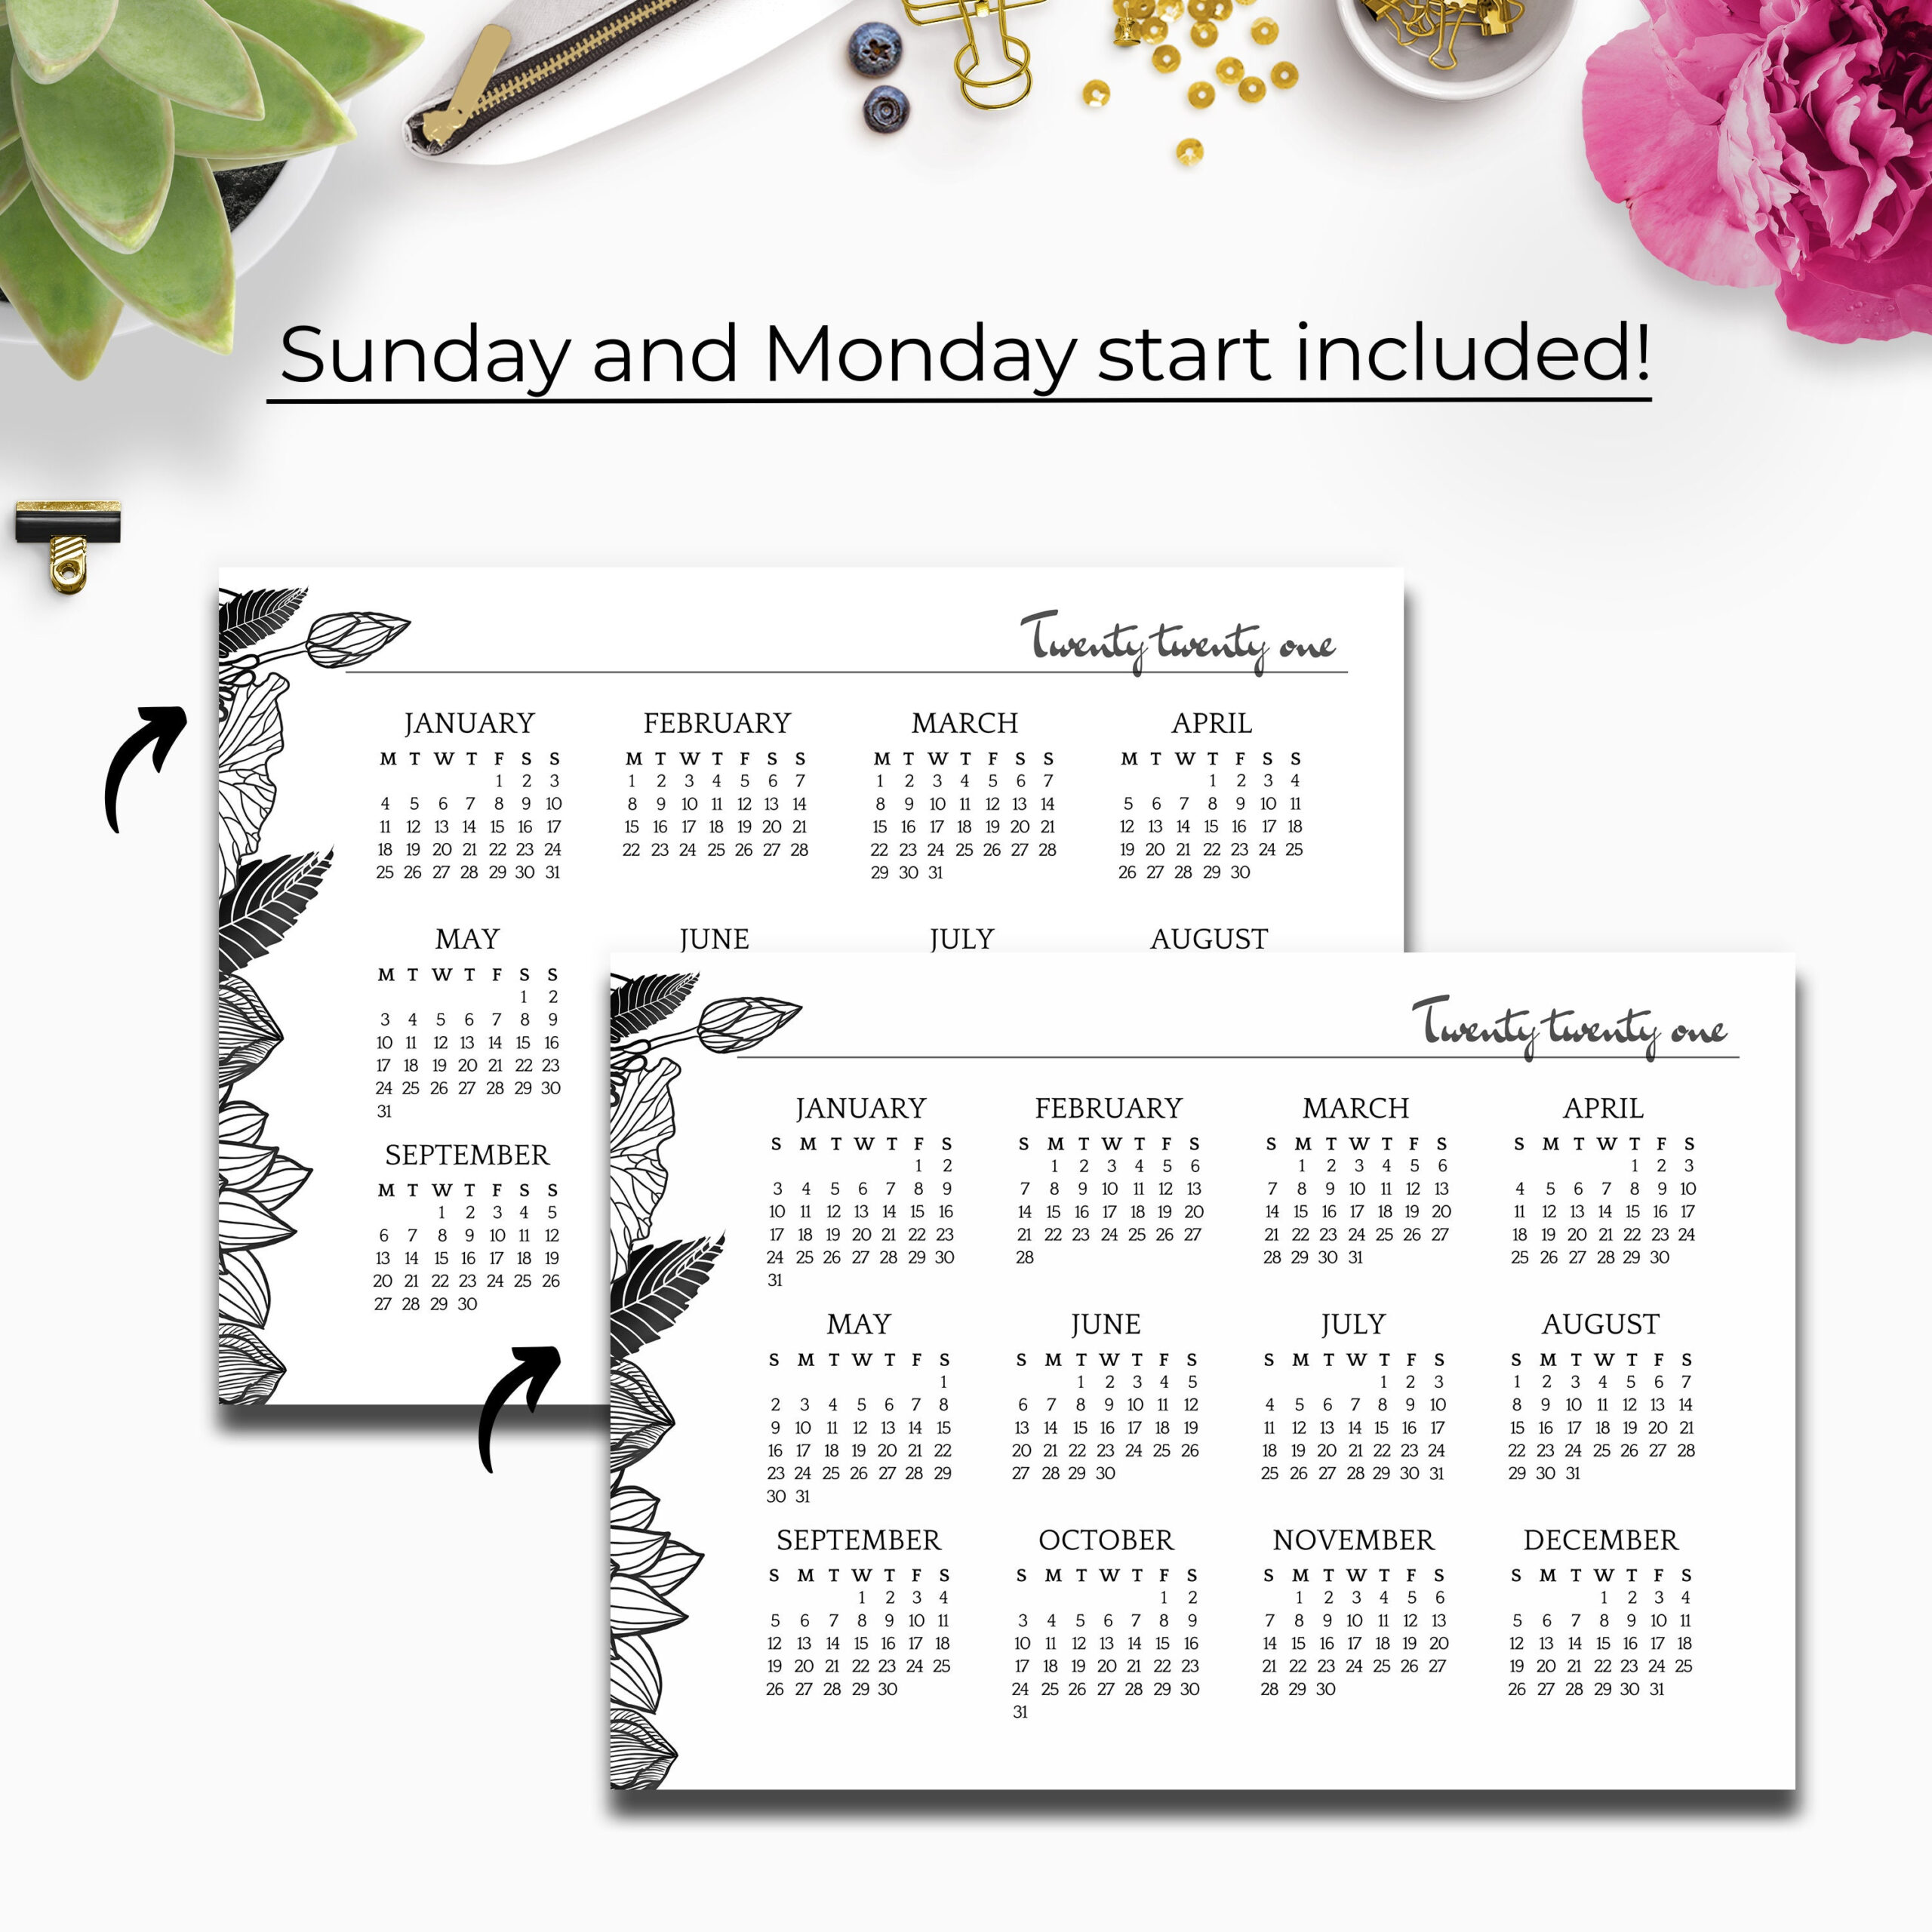 20212022 Year At A Glance Yearly Wall Calendar Printable | Etsy intended for At A Glance Wall Calendar 2022